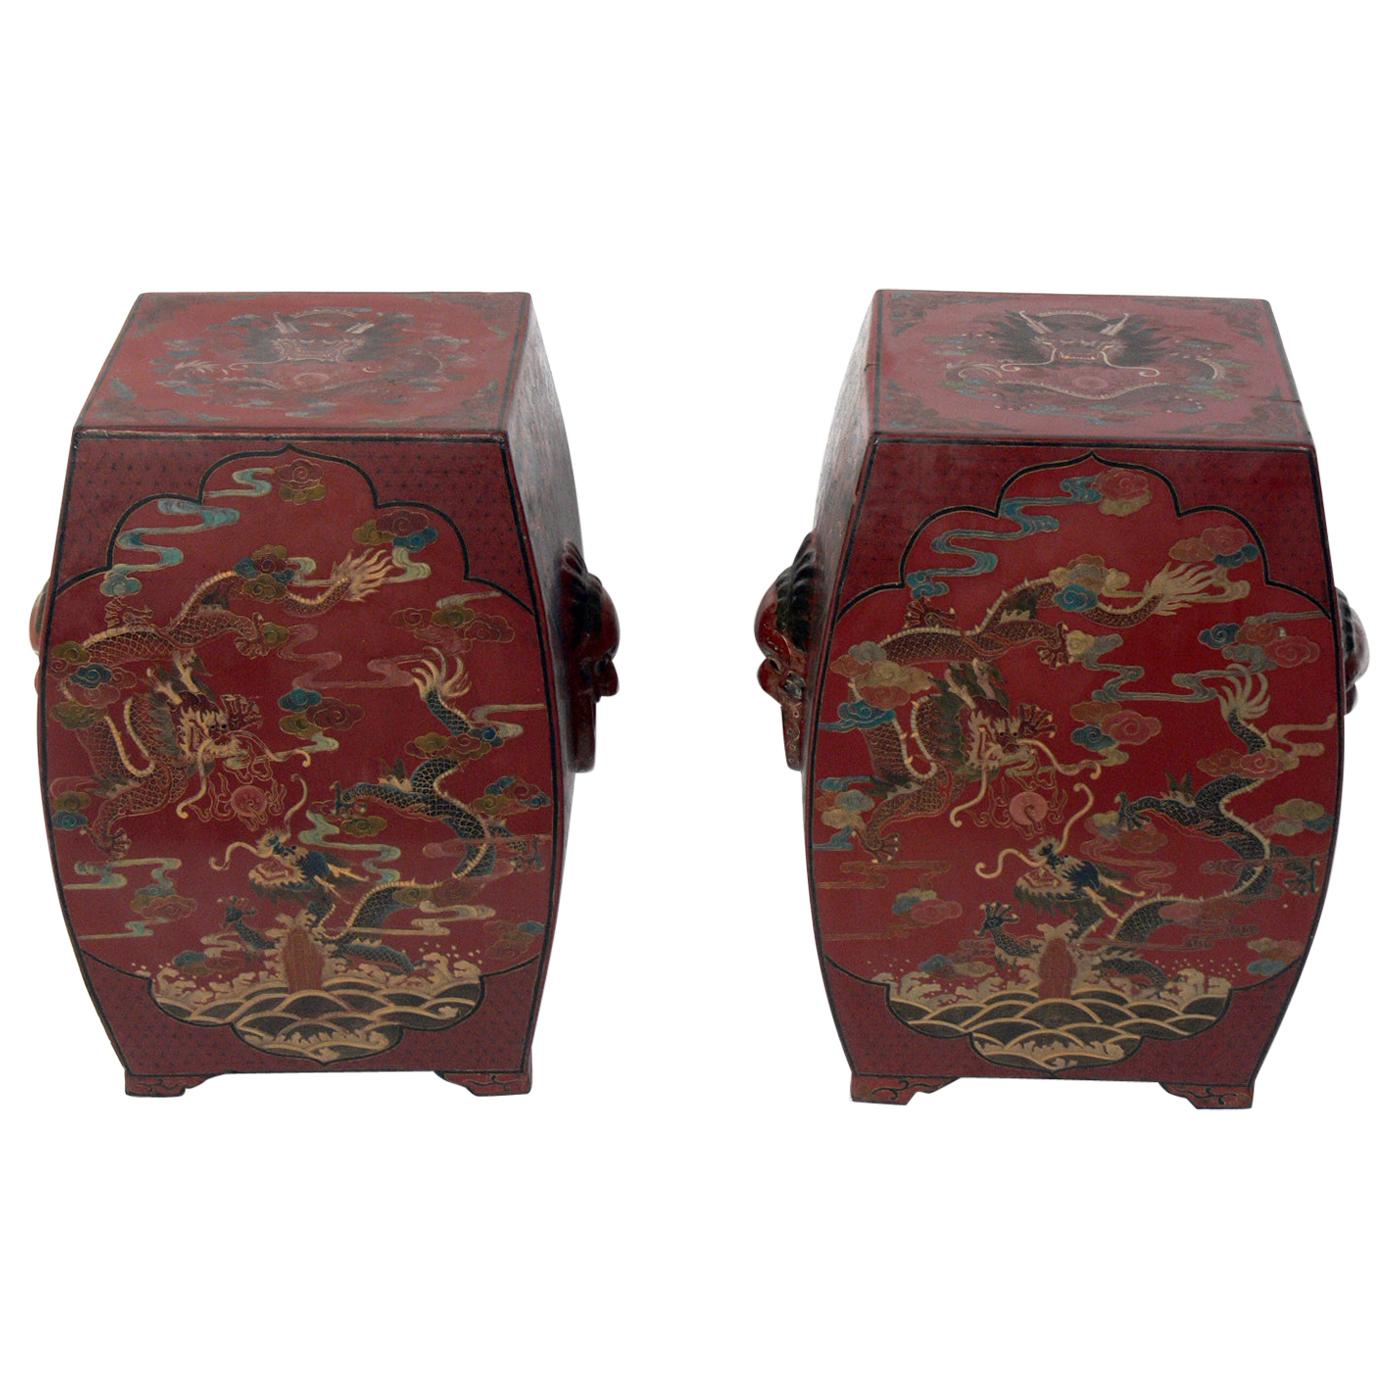 Pair of 19th Century Chinese Lacquered Garden Stools or End Tables